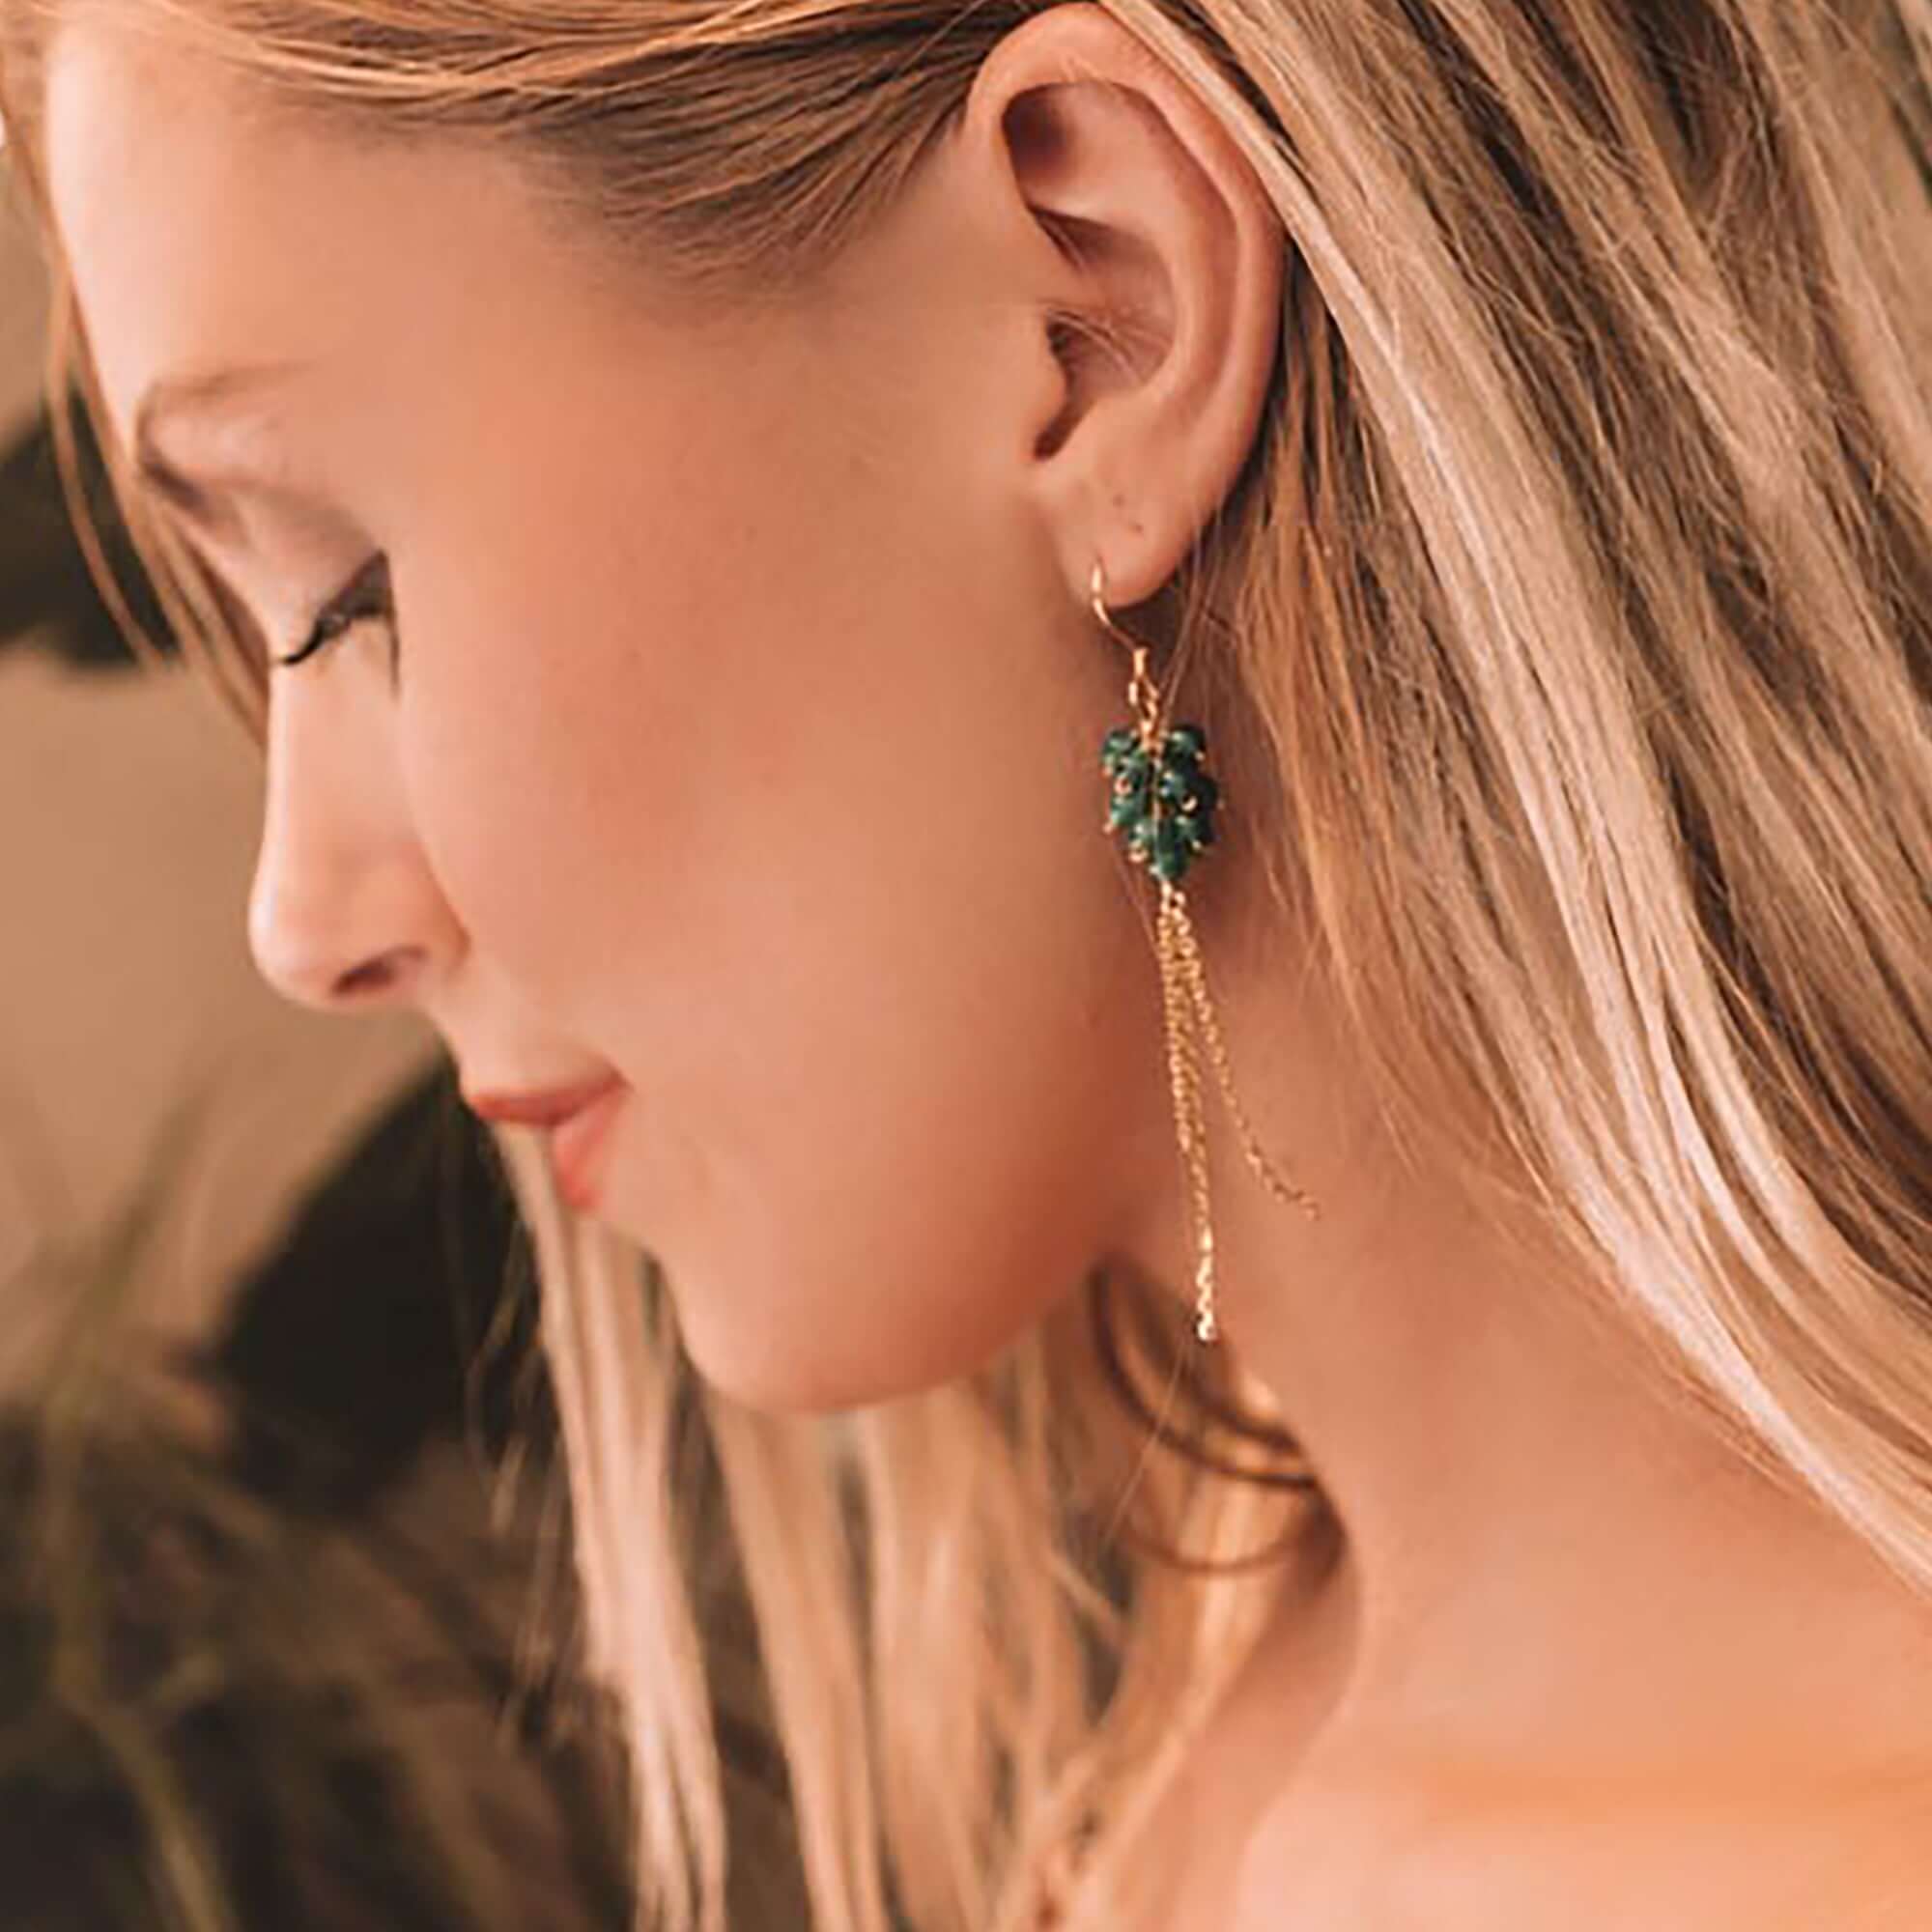 Handmade Gold Earrings with 3-Inch Dangling Green Apatite Gems